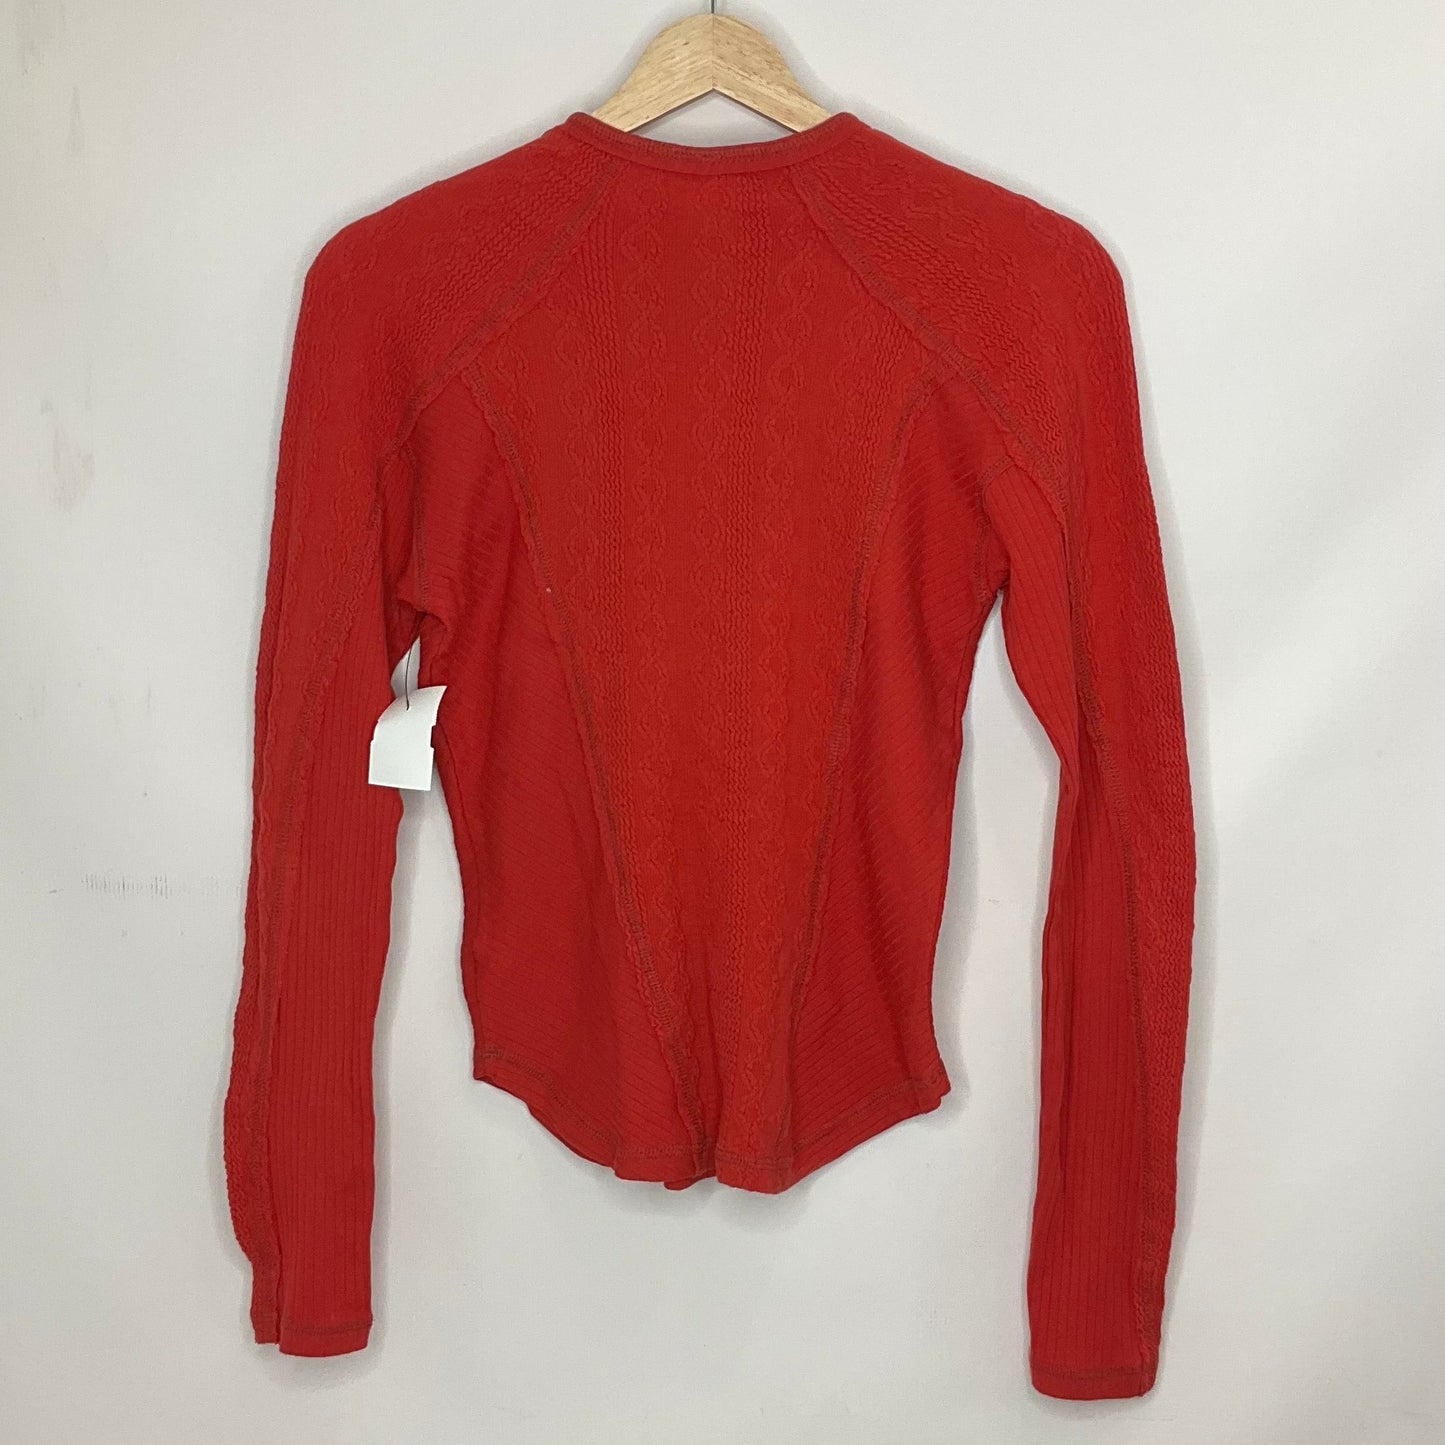 Red Athletic Top Long Sleeve Crewneck Free People, Size Xs